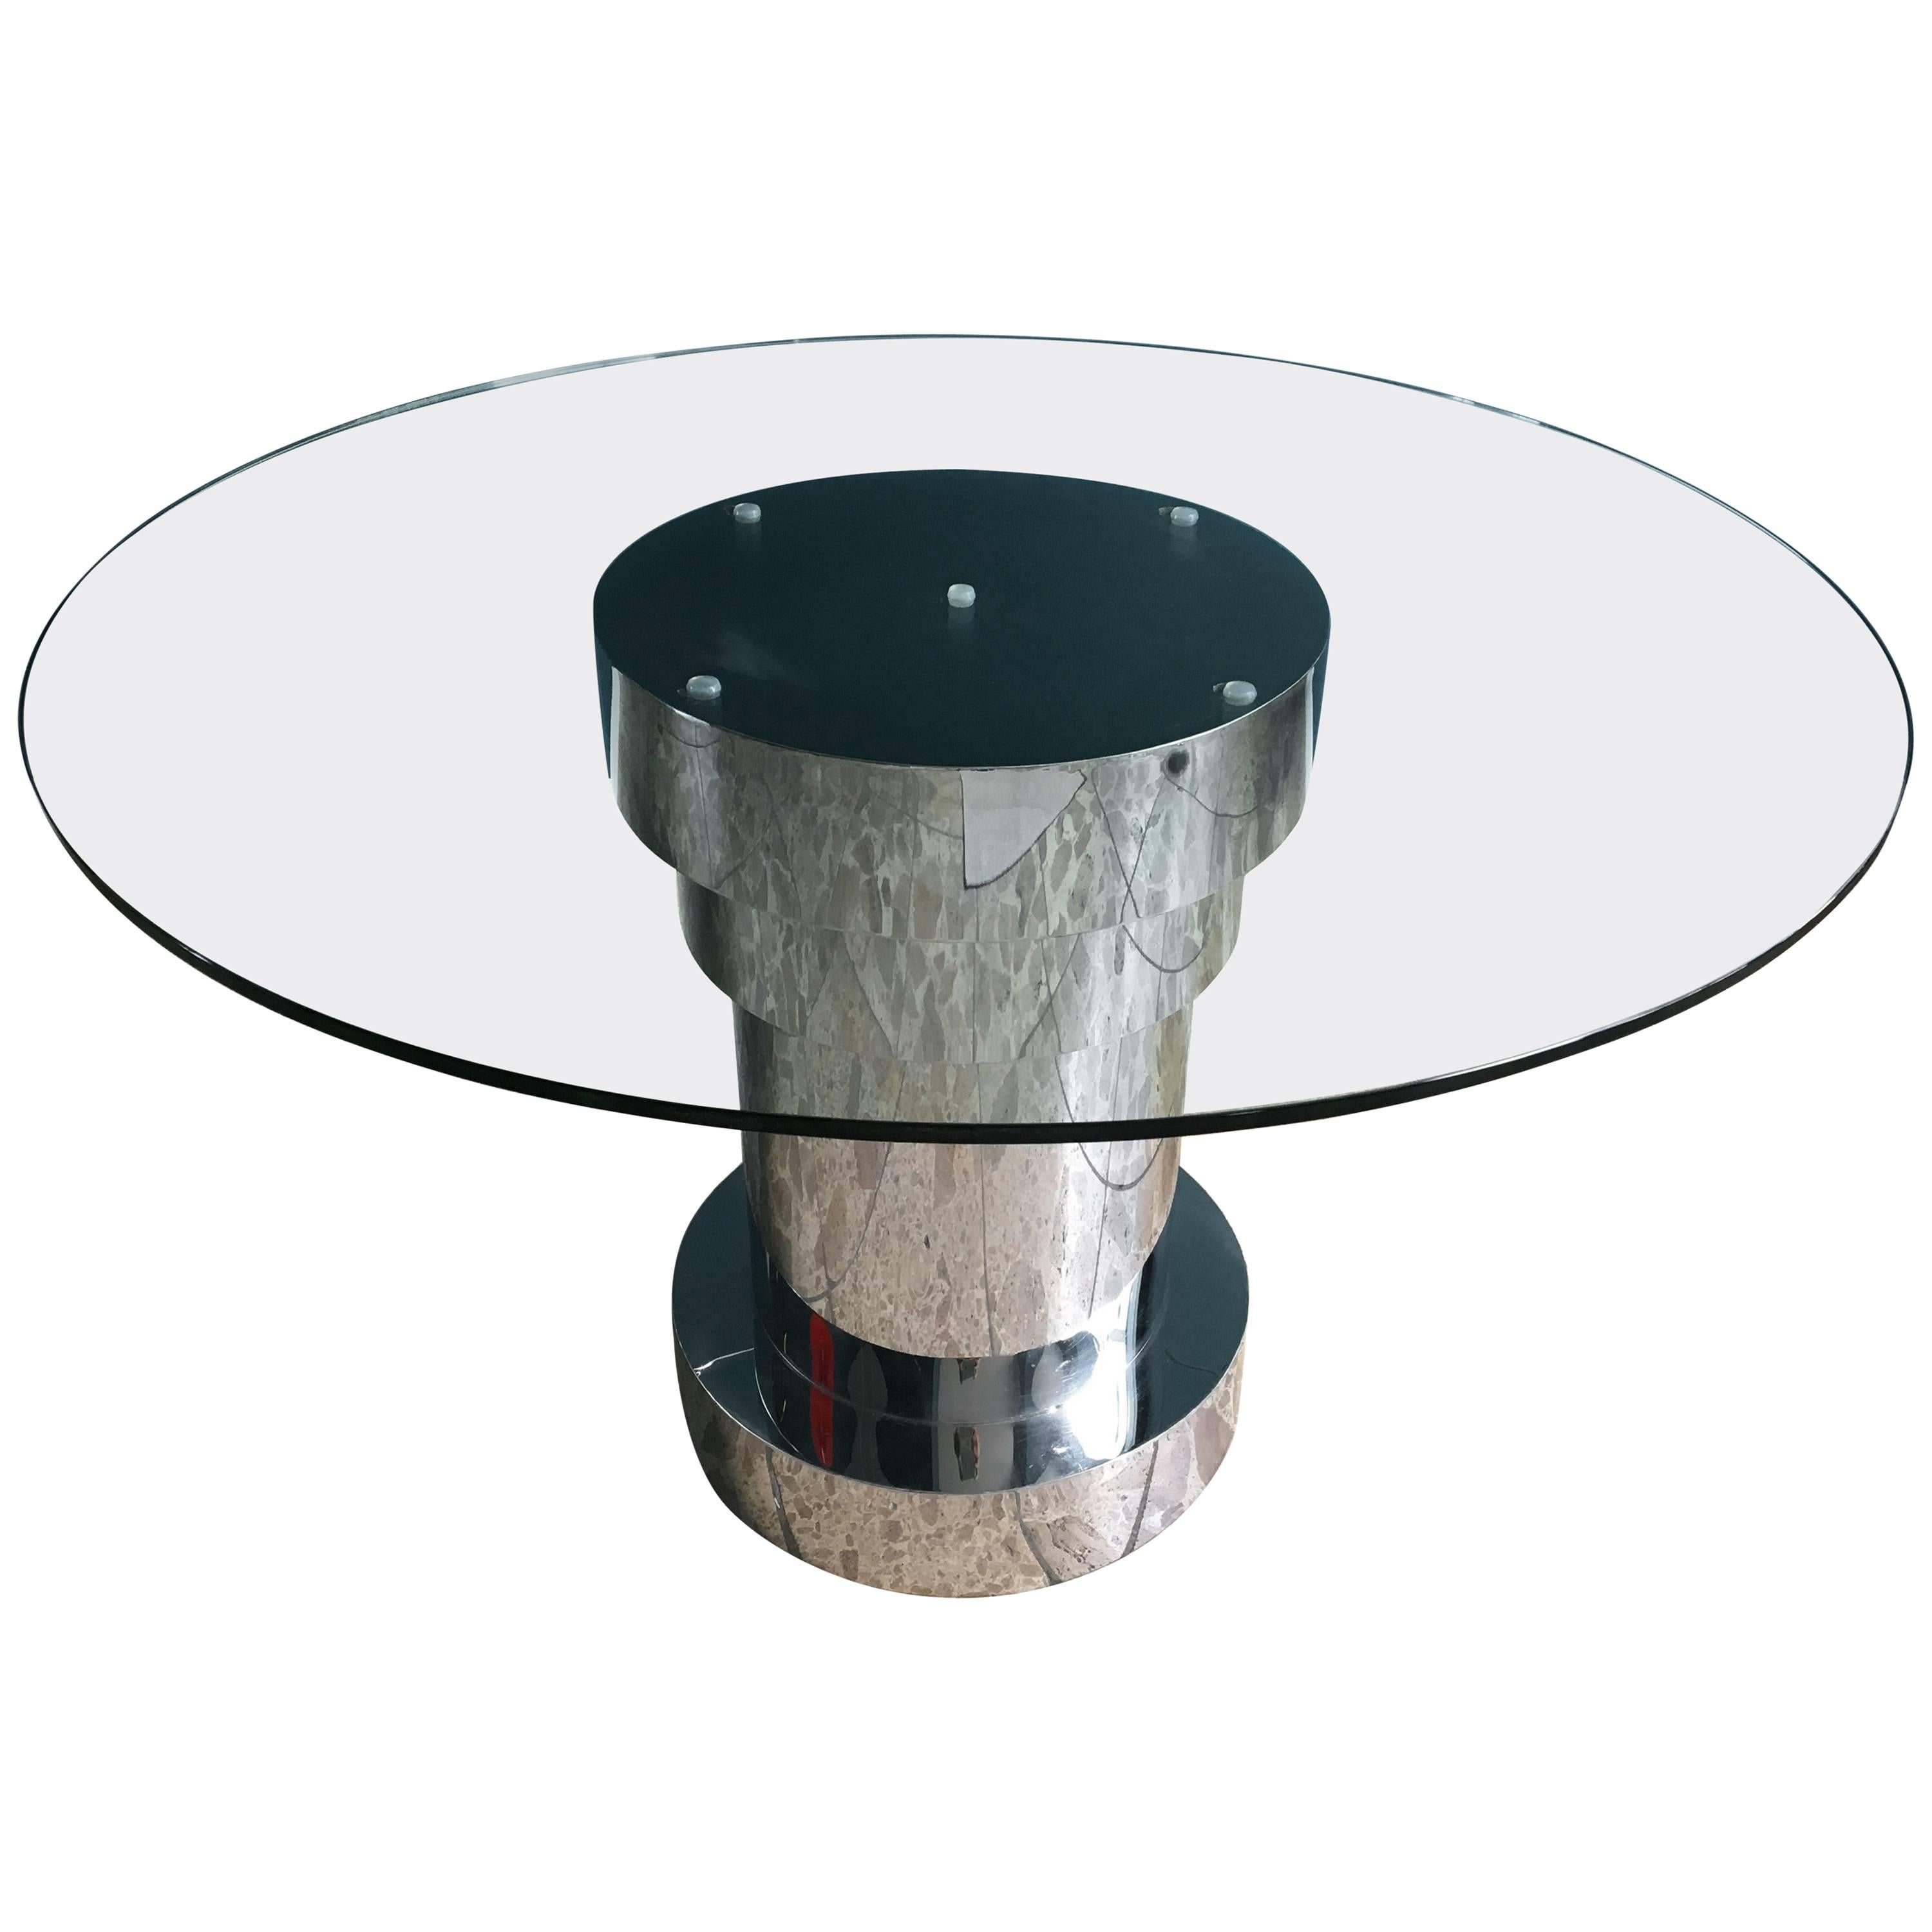 Modern Italian Dining Table with Circular Glass Top and Metal Clad Base, 1980s